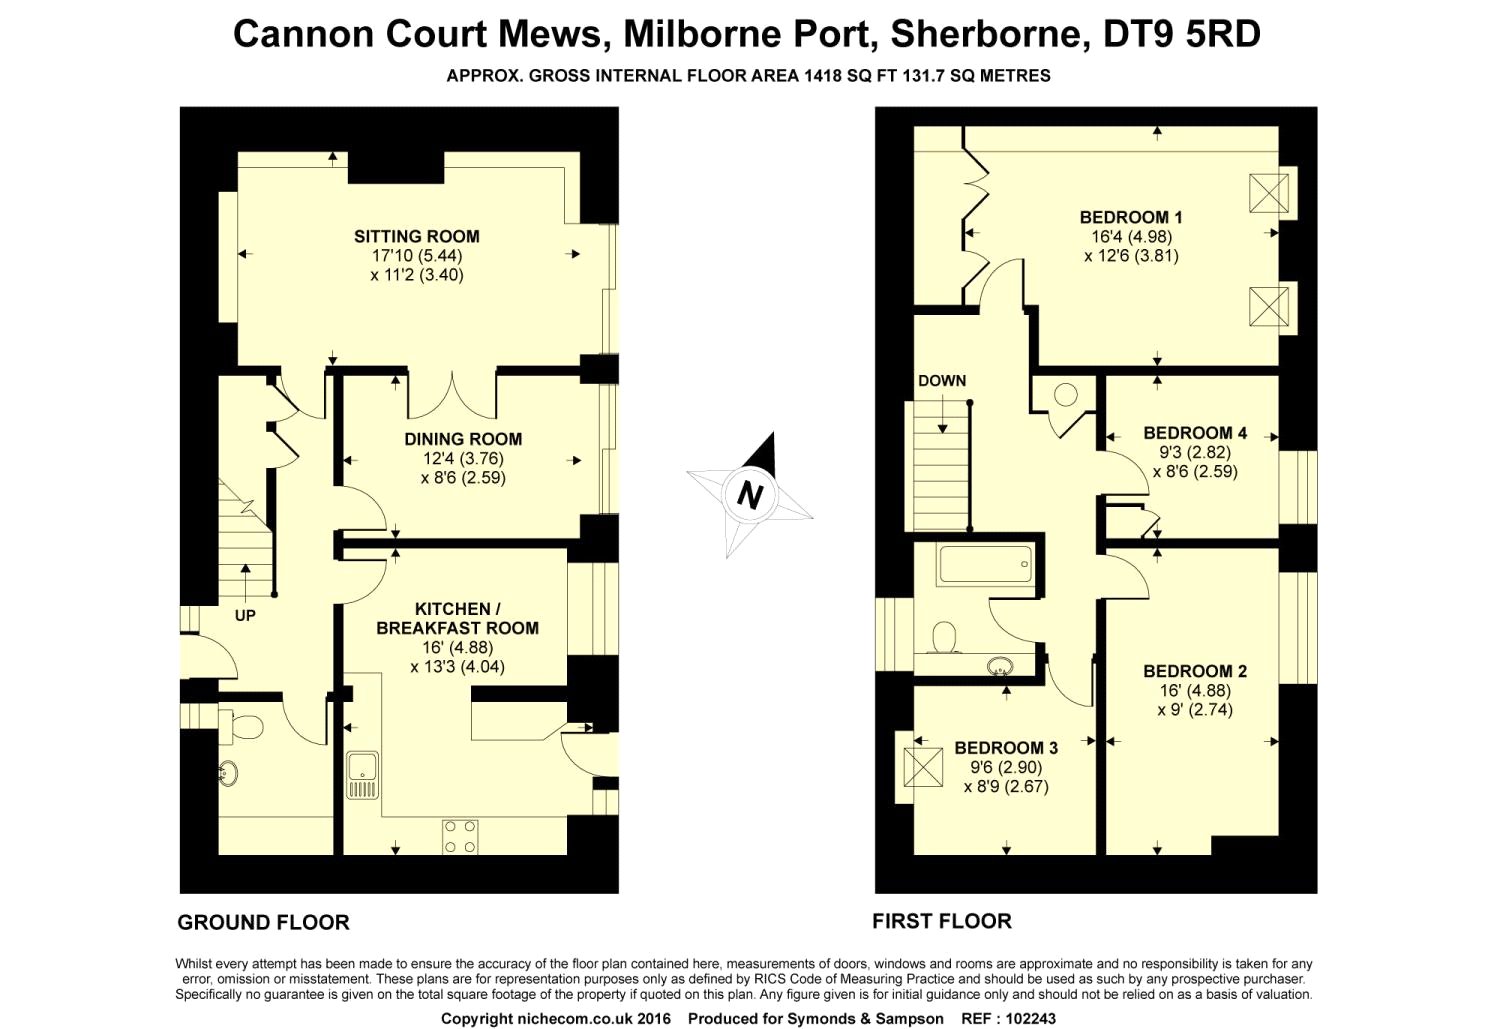 4 Bedrooms End terrace house to rent in Cannon Court Mews, Milborne Port, Sherborne, Somerset DT9